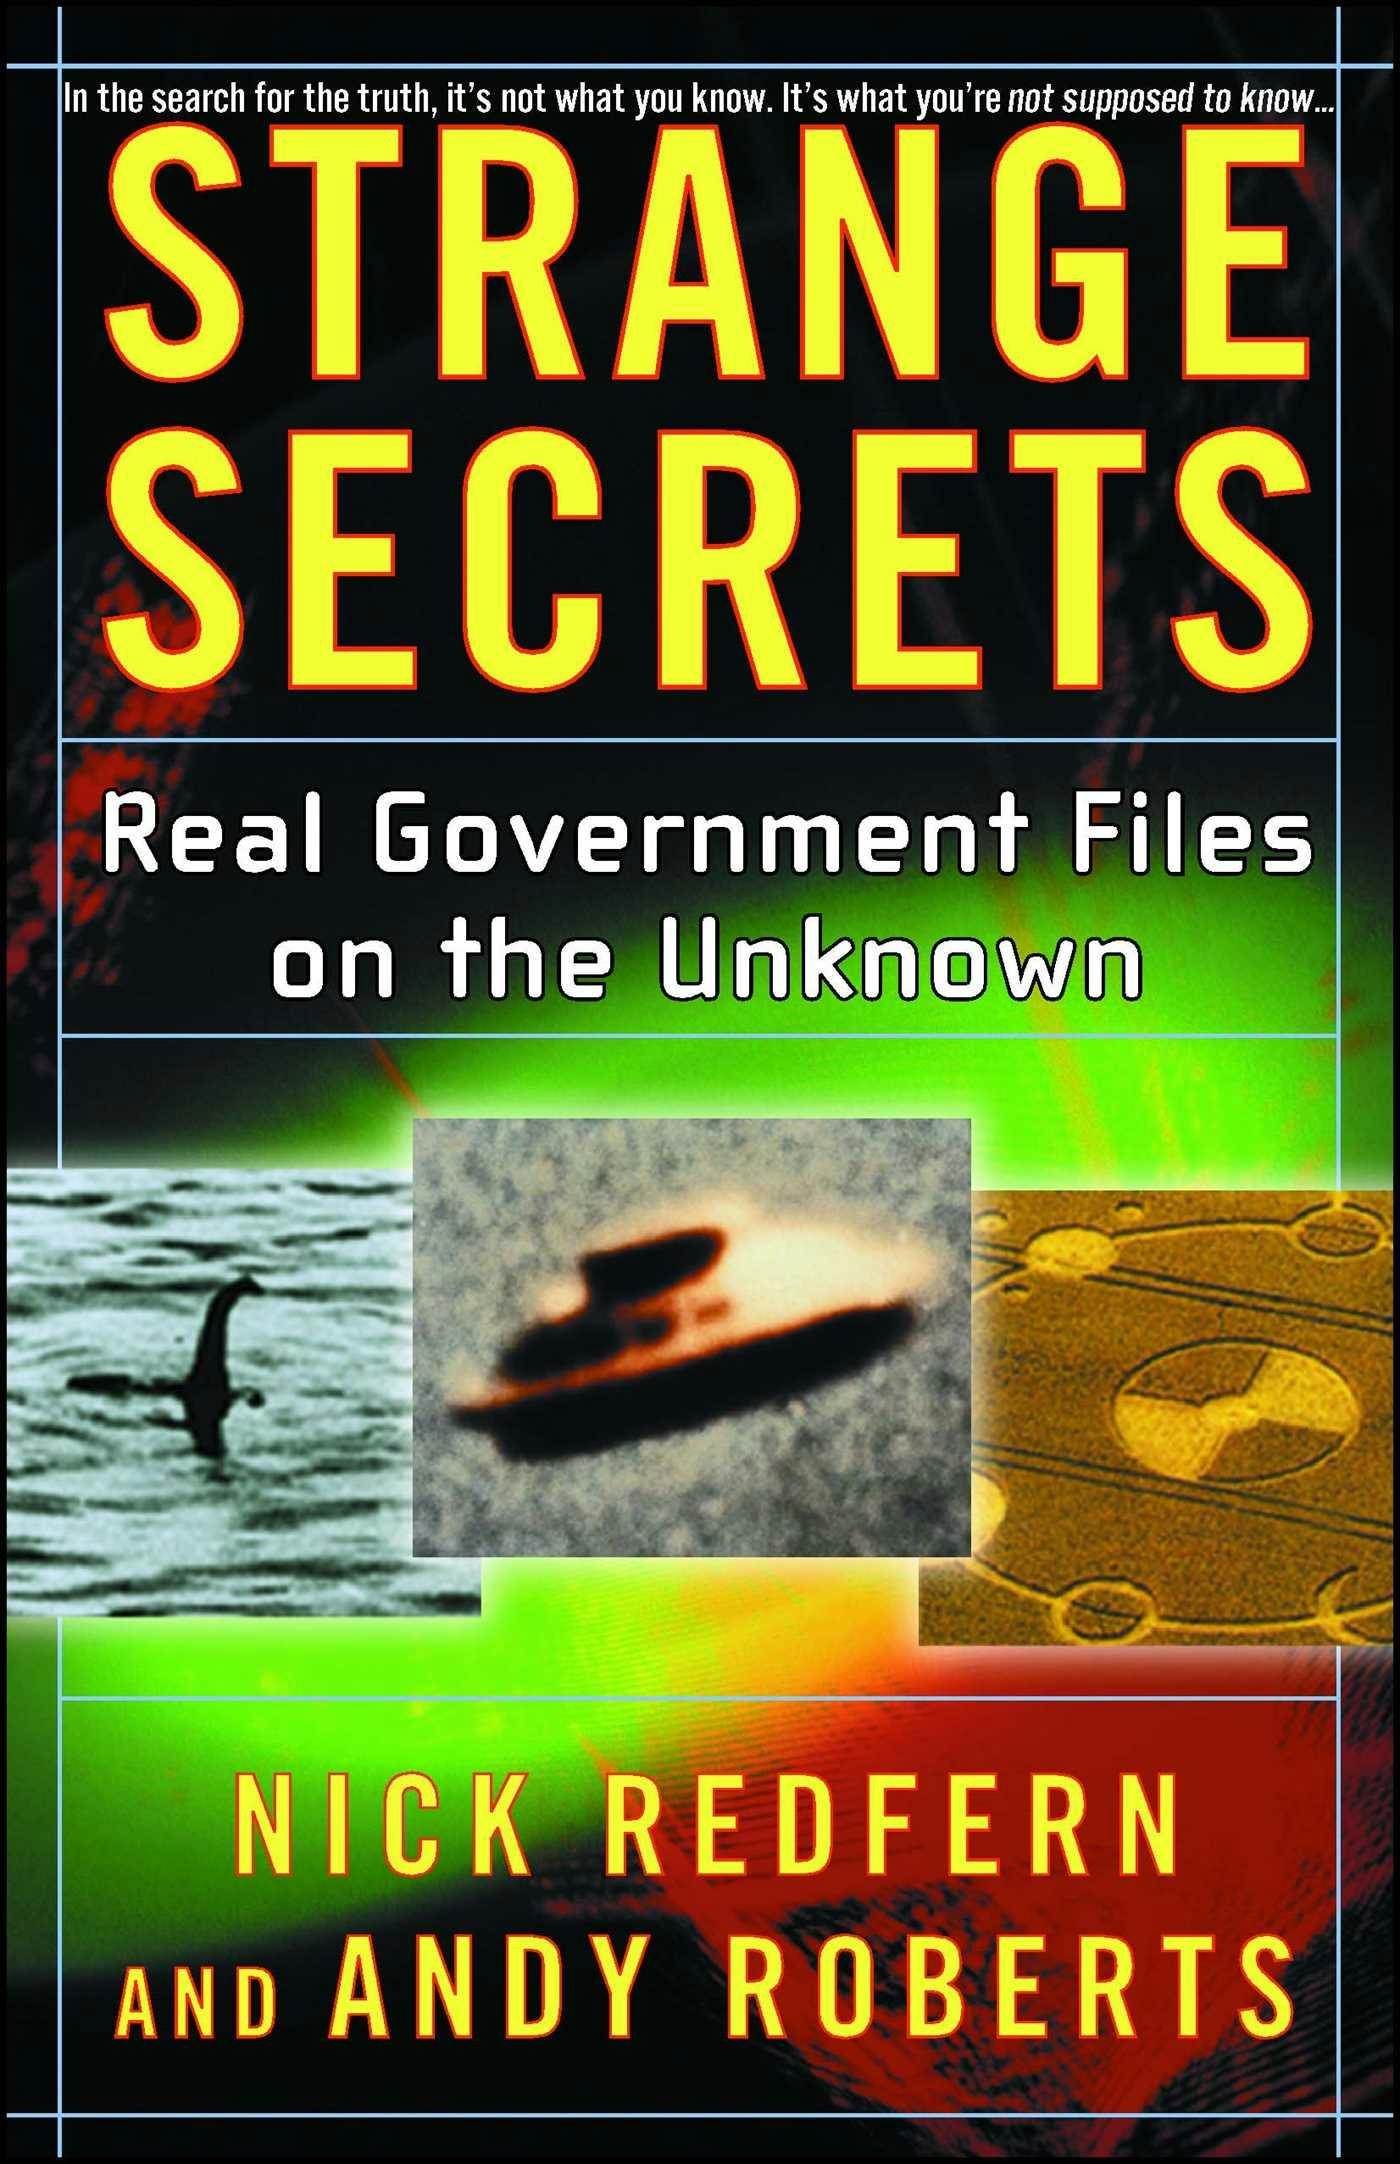 Strange Secrets: Real Government Files on the Unknown - Nick Redfern, Andy Roberts